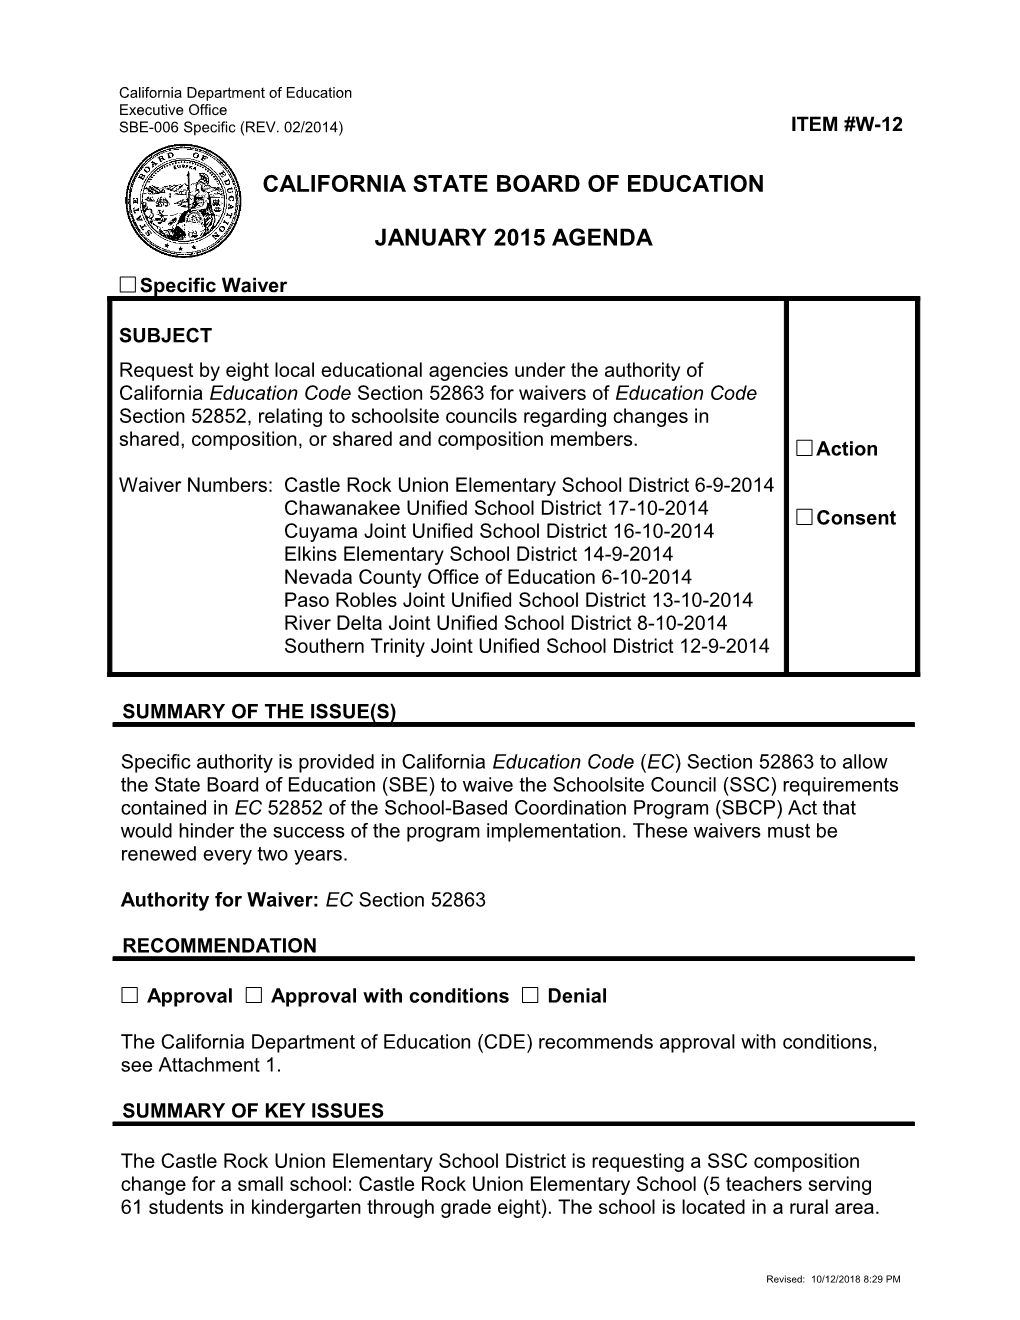 January 2015 Waiver Item W-12 - Meeting Agendas (CA State Board of Education)